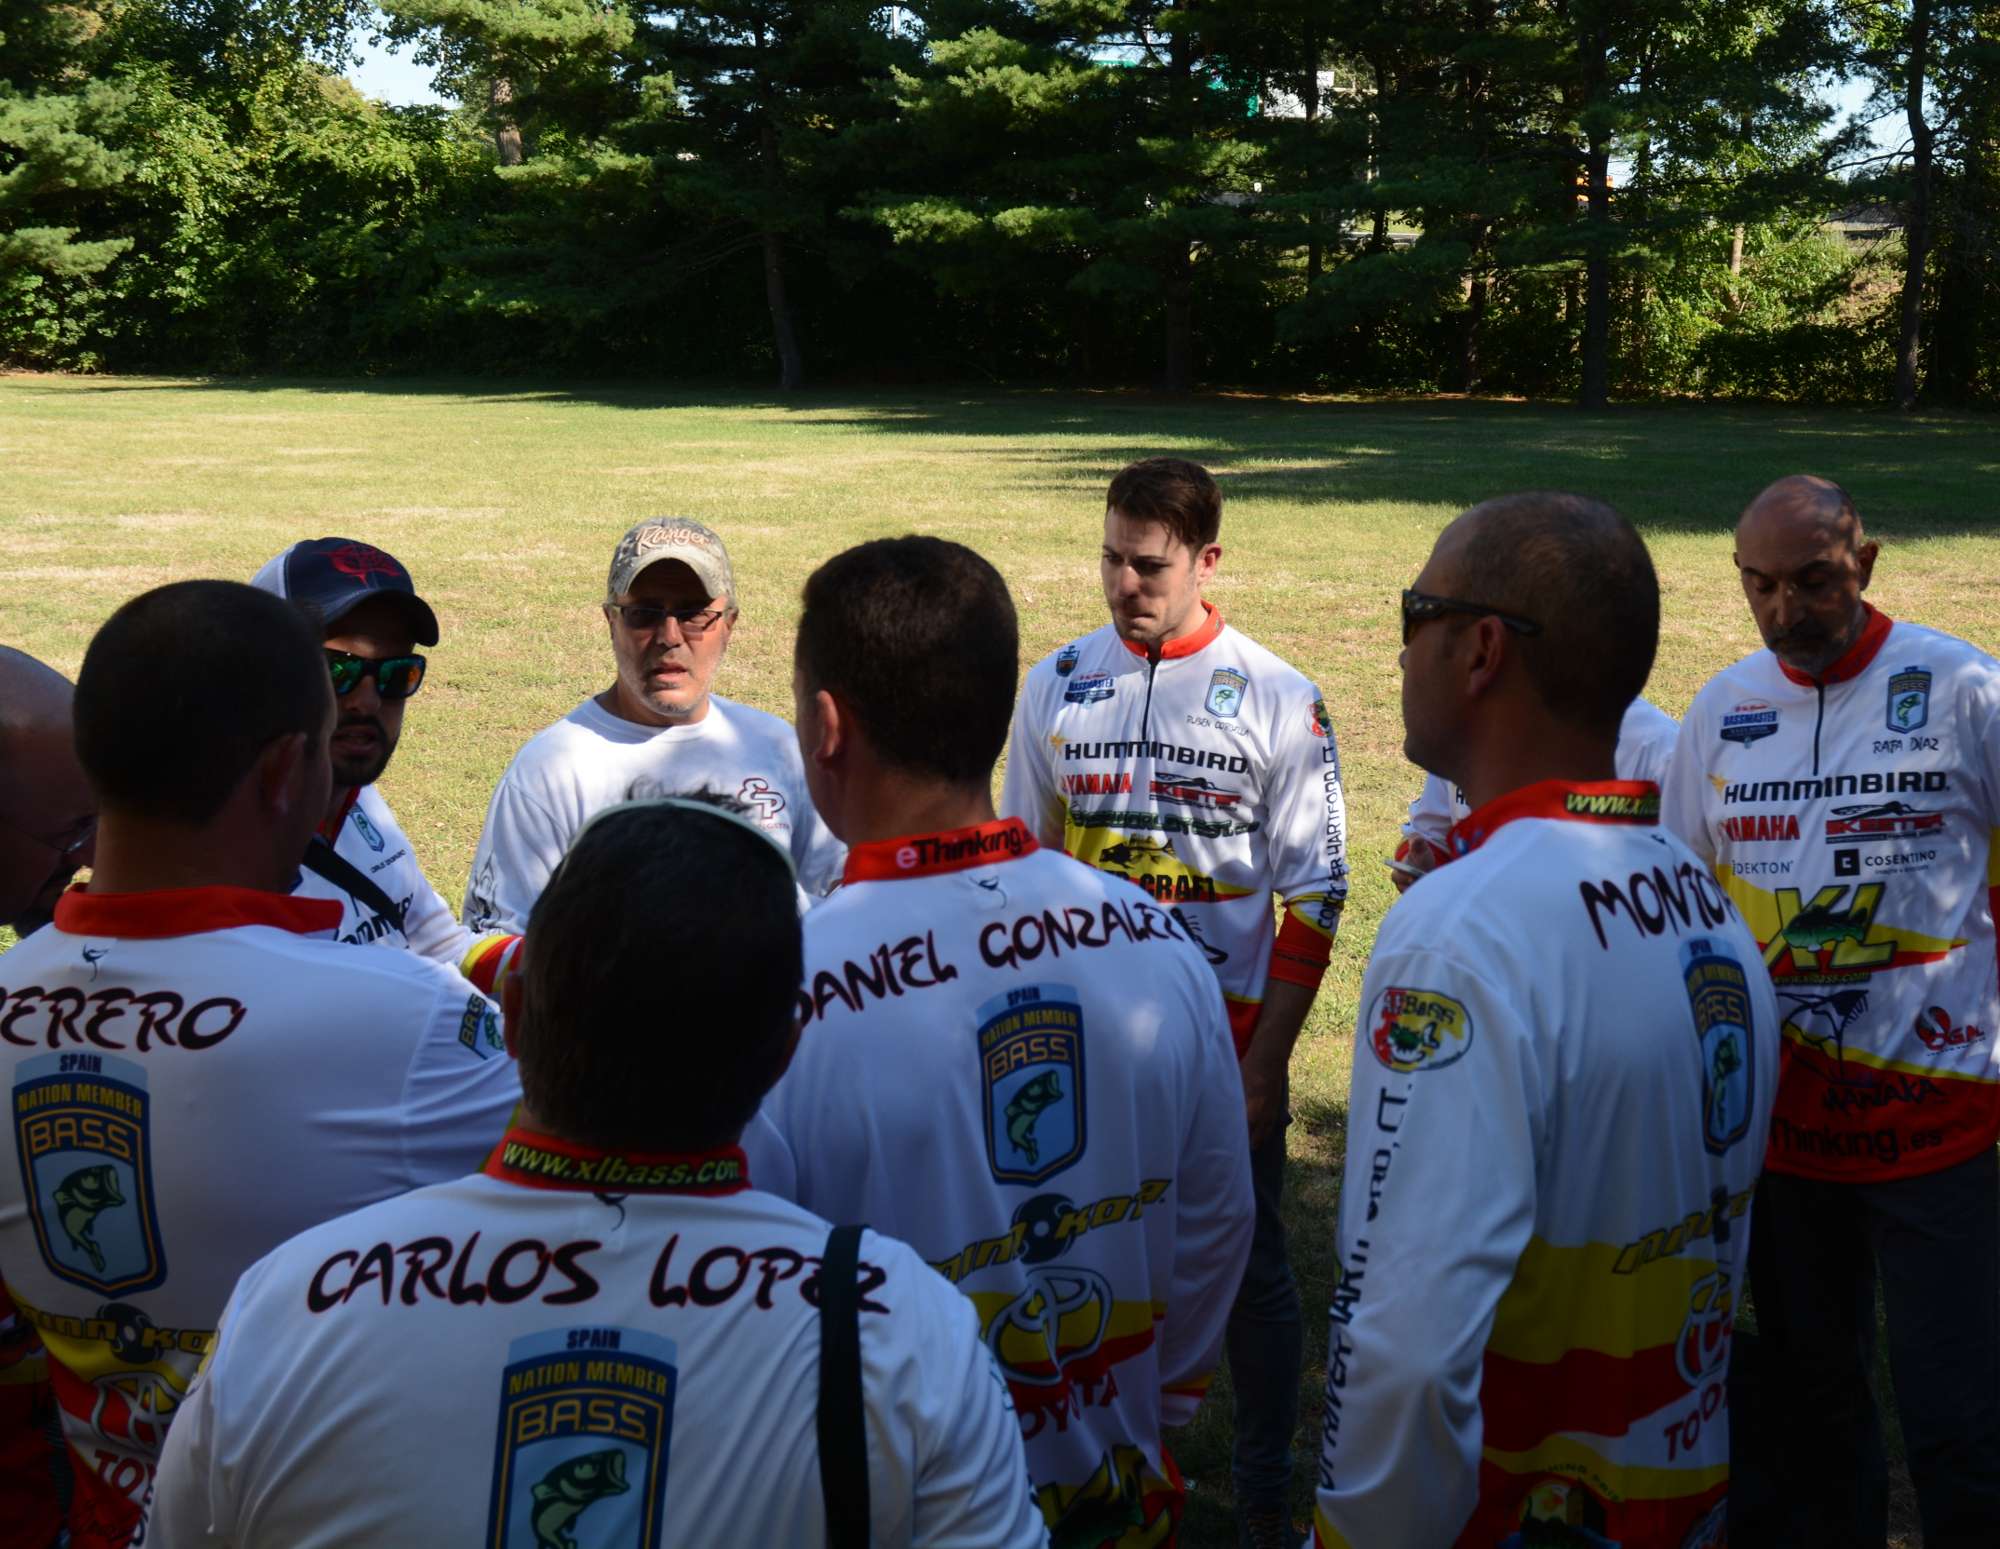 Before the briefing, Giner read the entirety of the rules to the team in Spanish.